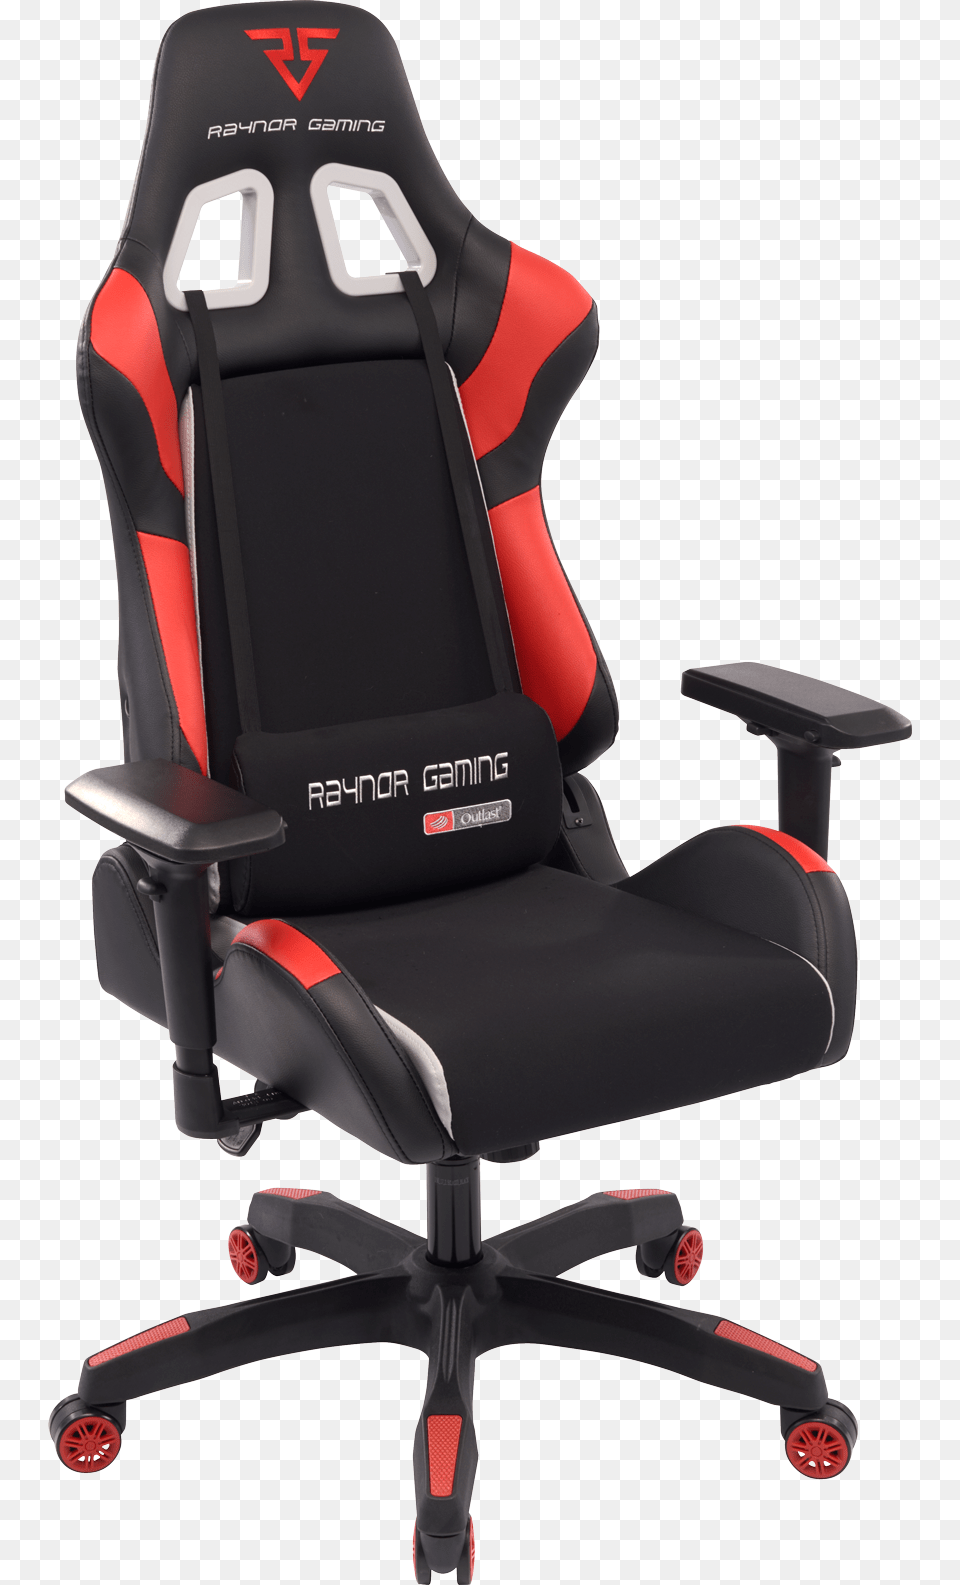 Energy Pro In Red Raynor Gaming Chair, Cushion, Home Decor, Furniture, Headrest Free Transparent Png